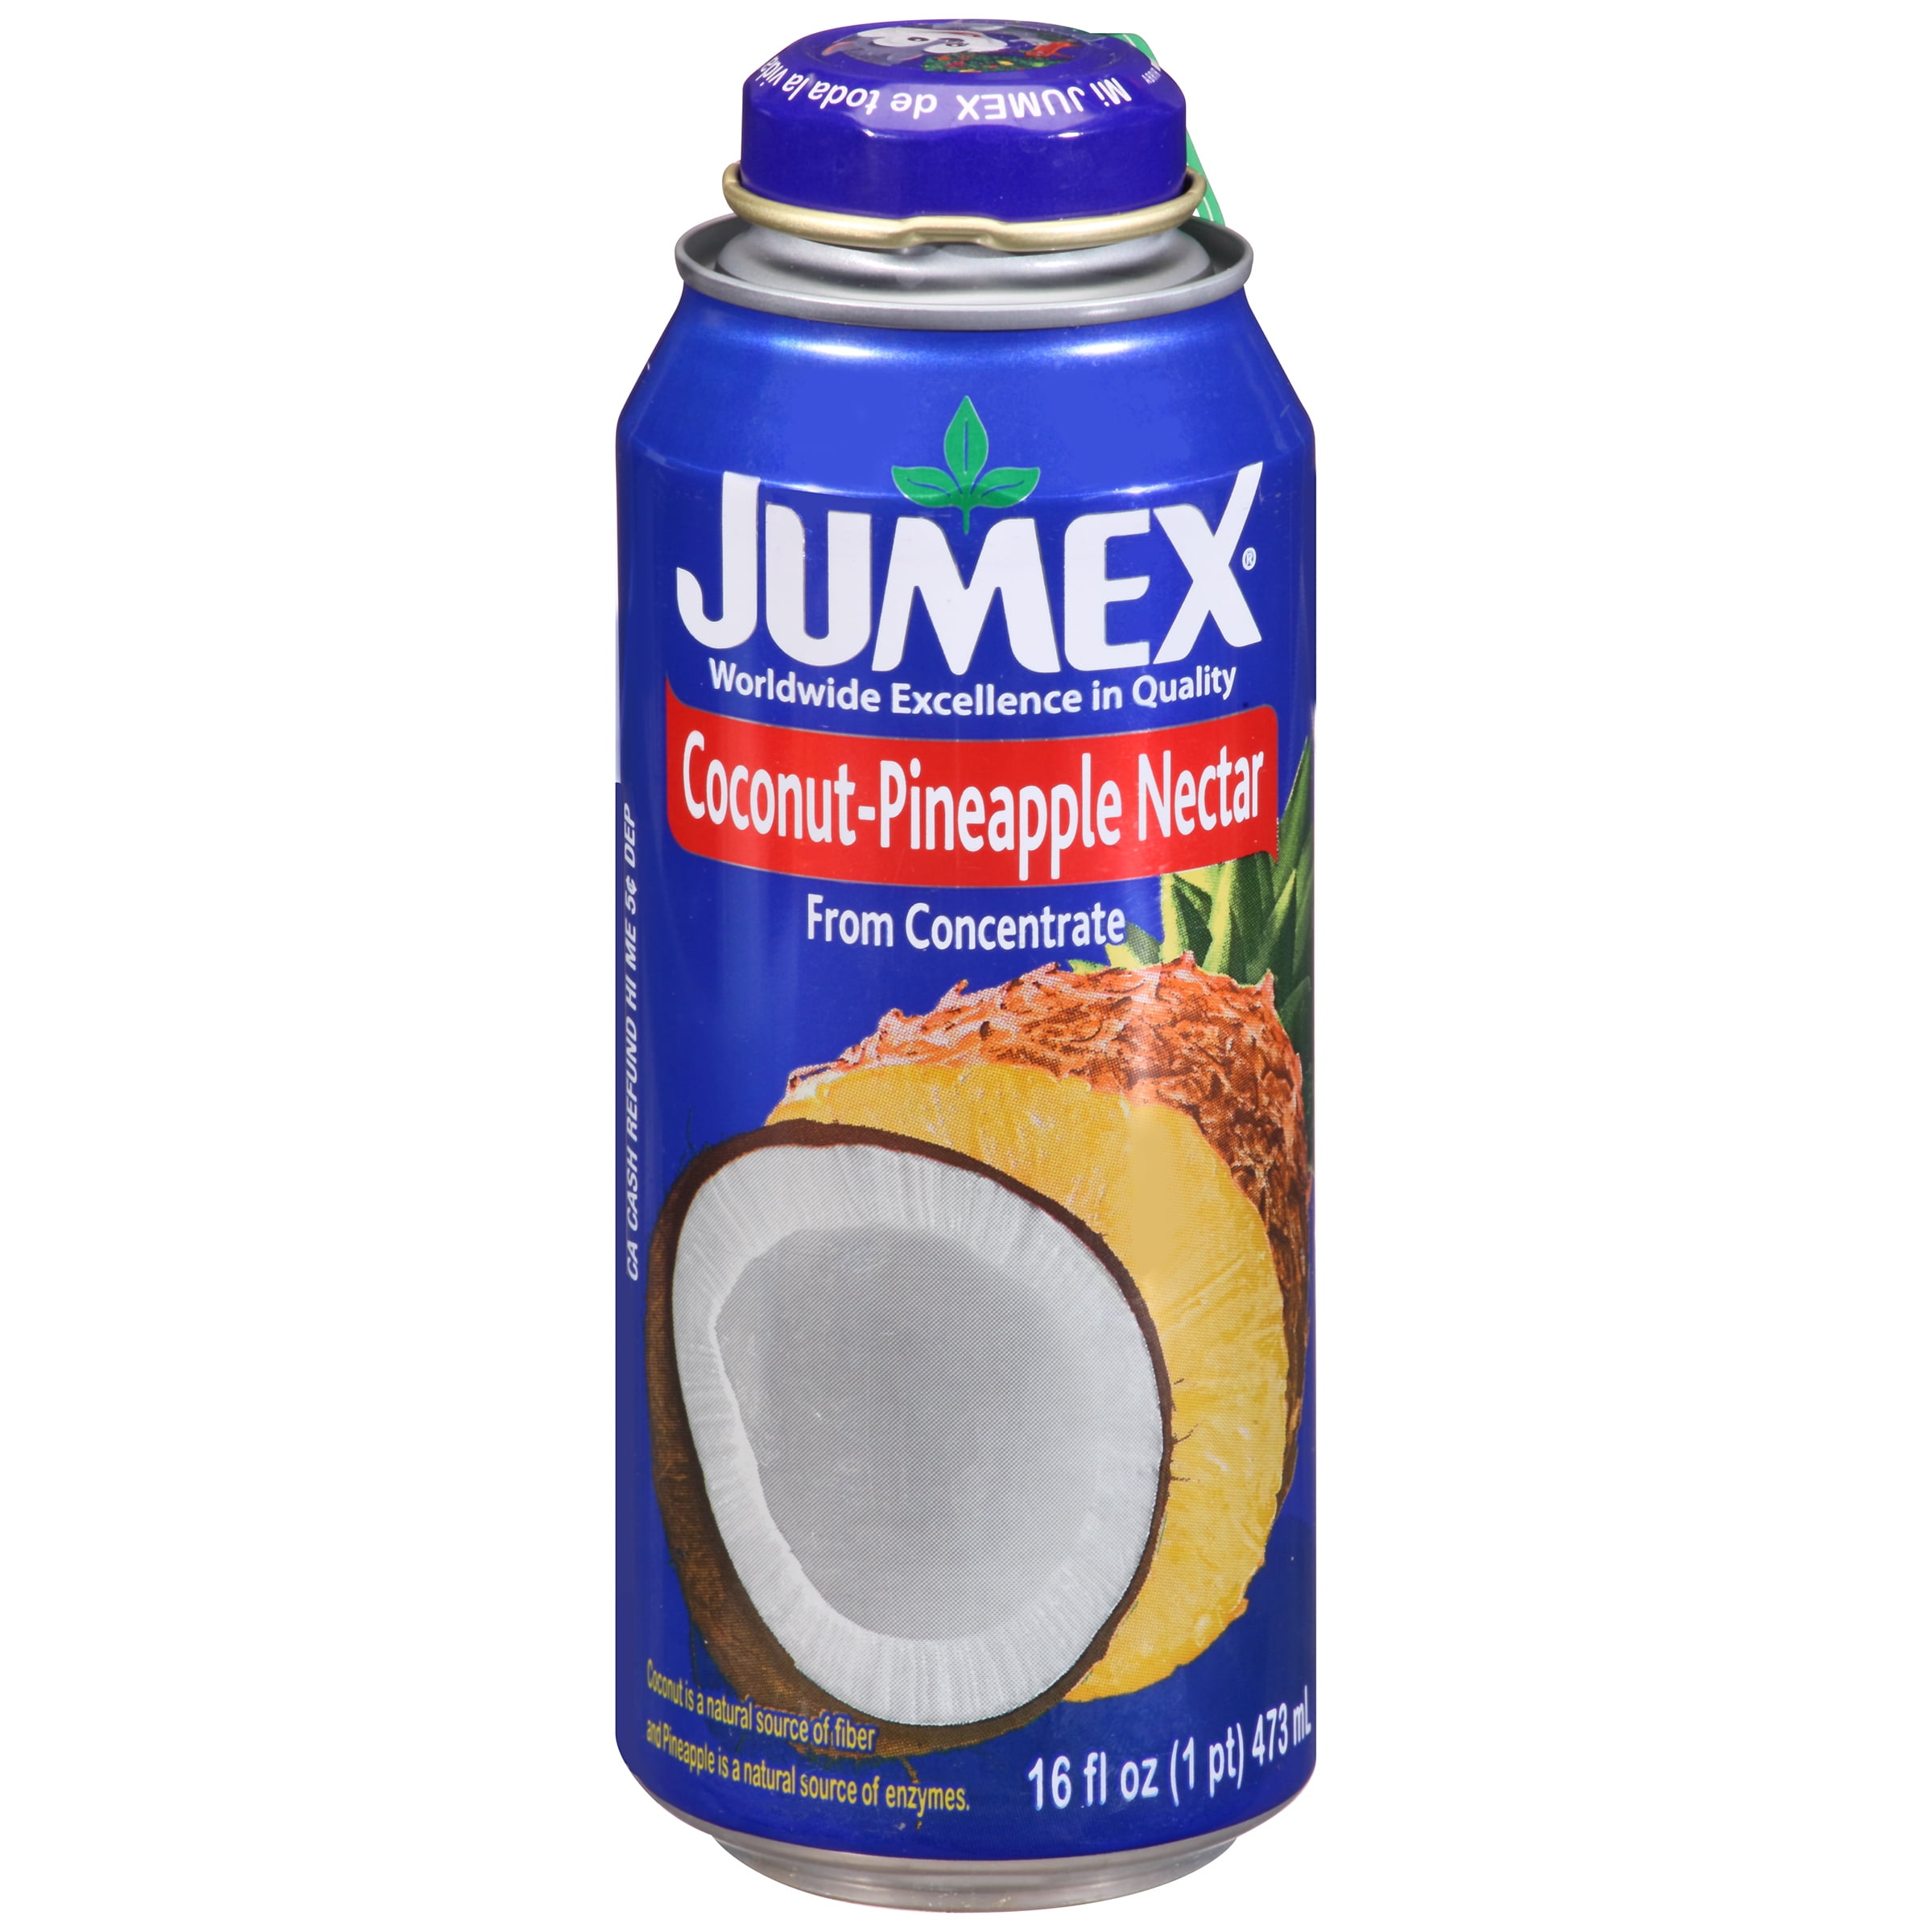 Jumex® Coconut-Pineapple Nectar from Concentrate 16 fl. oz. Pull-Top